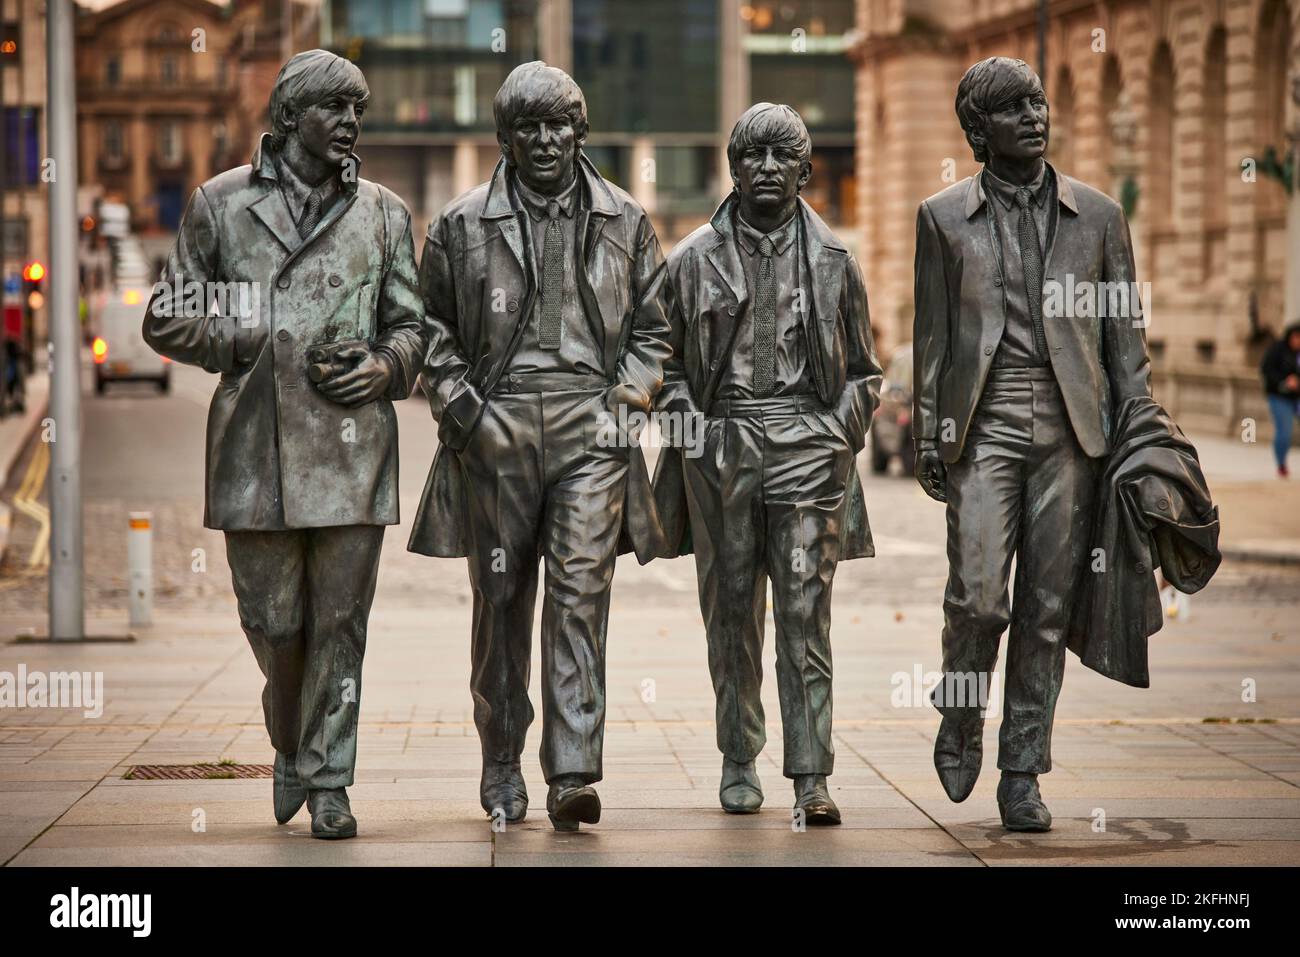 Liverpool albert dock waterfront The Beatles Pier Head  bronze statues of the four Beatles created by sculptor Andy Edwards & unveiled in 2015 Stock Photo